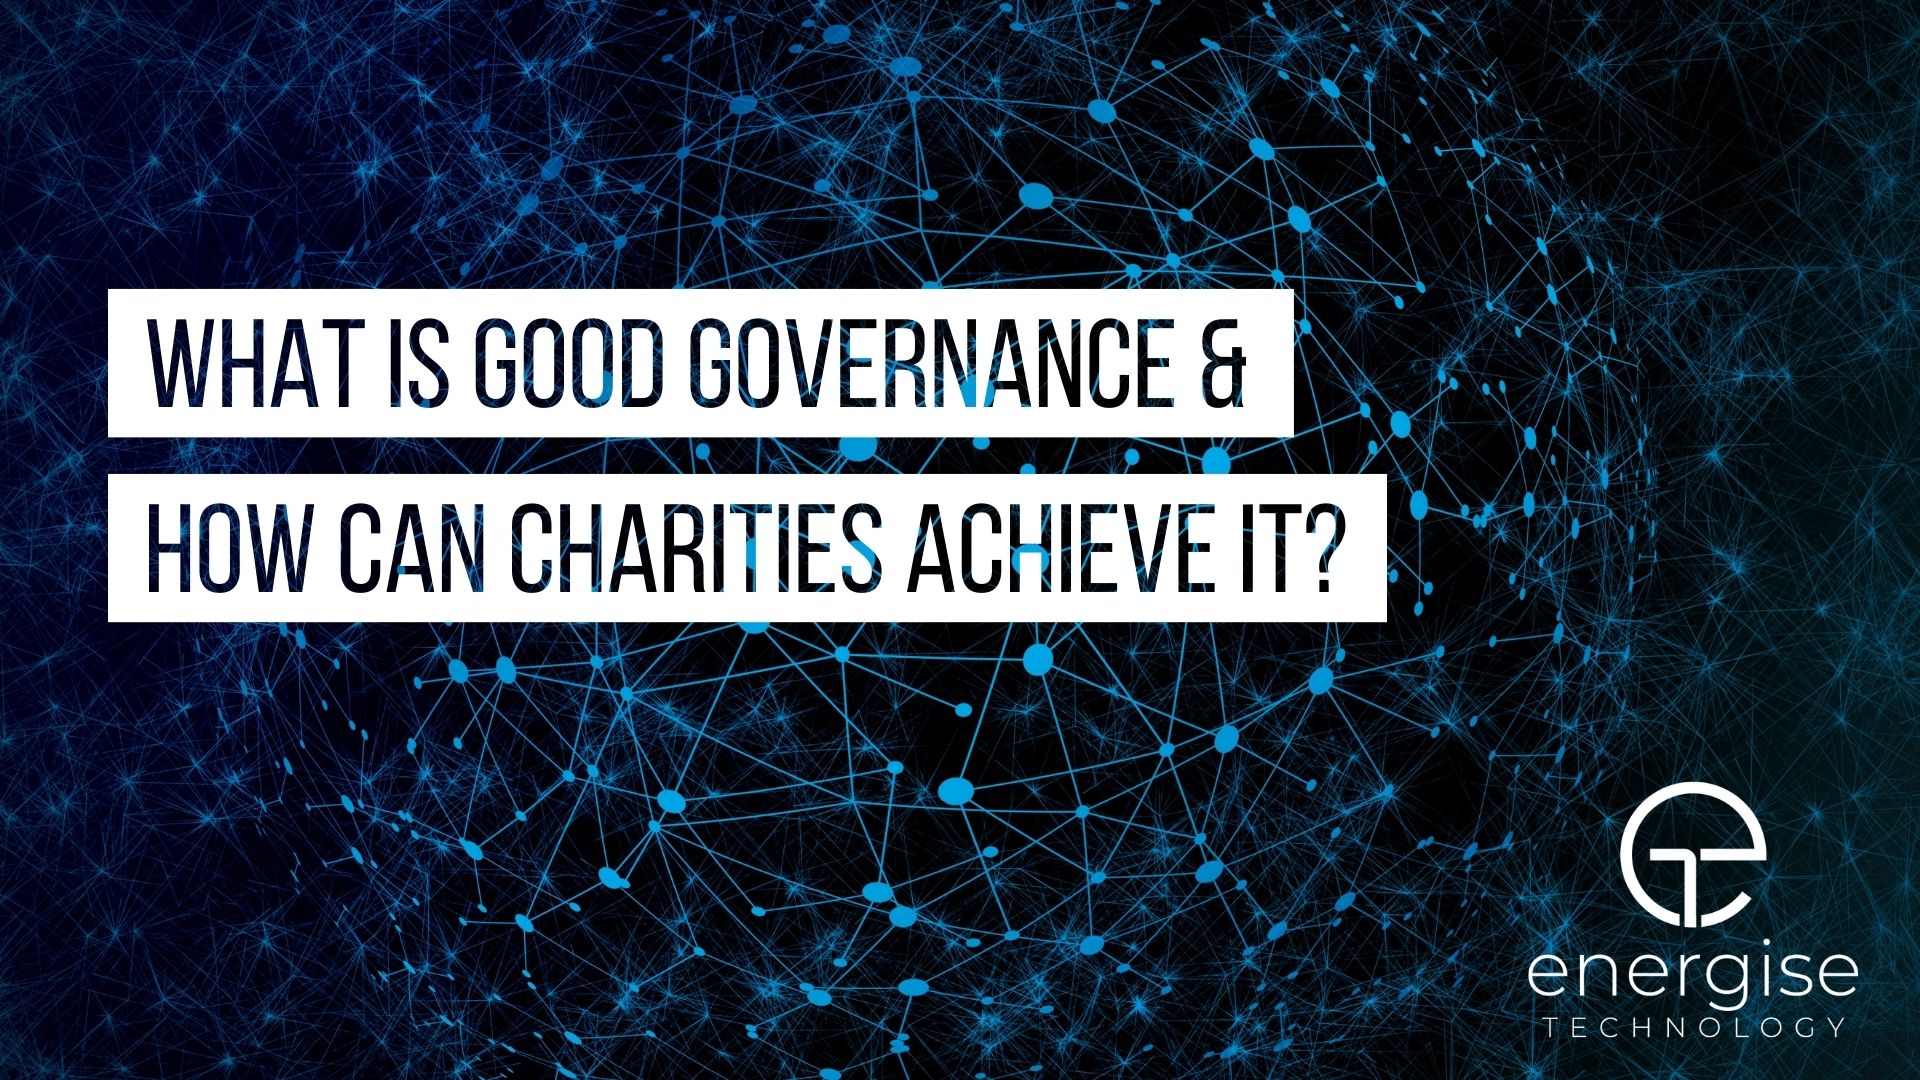 What is good governance & how can charities achieve it?